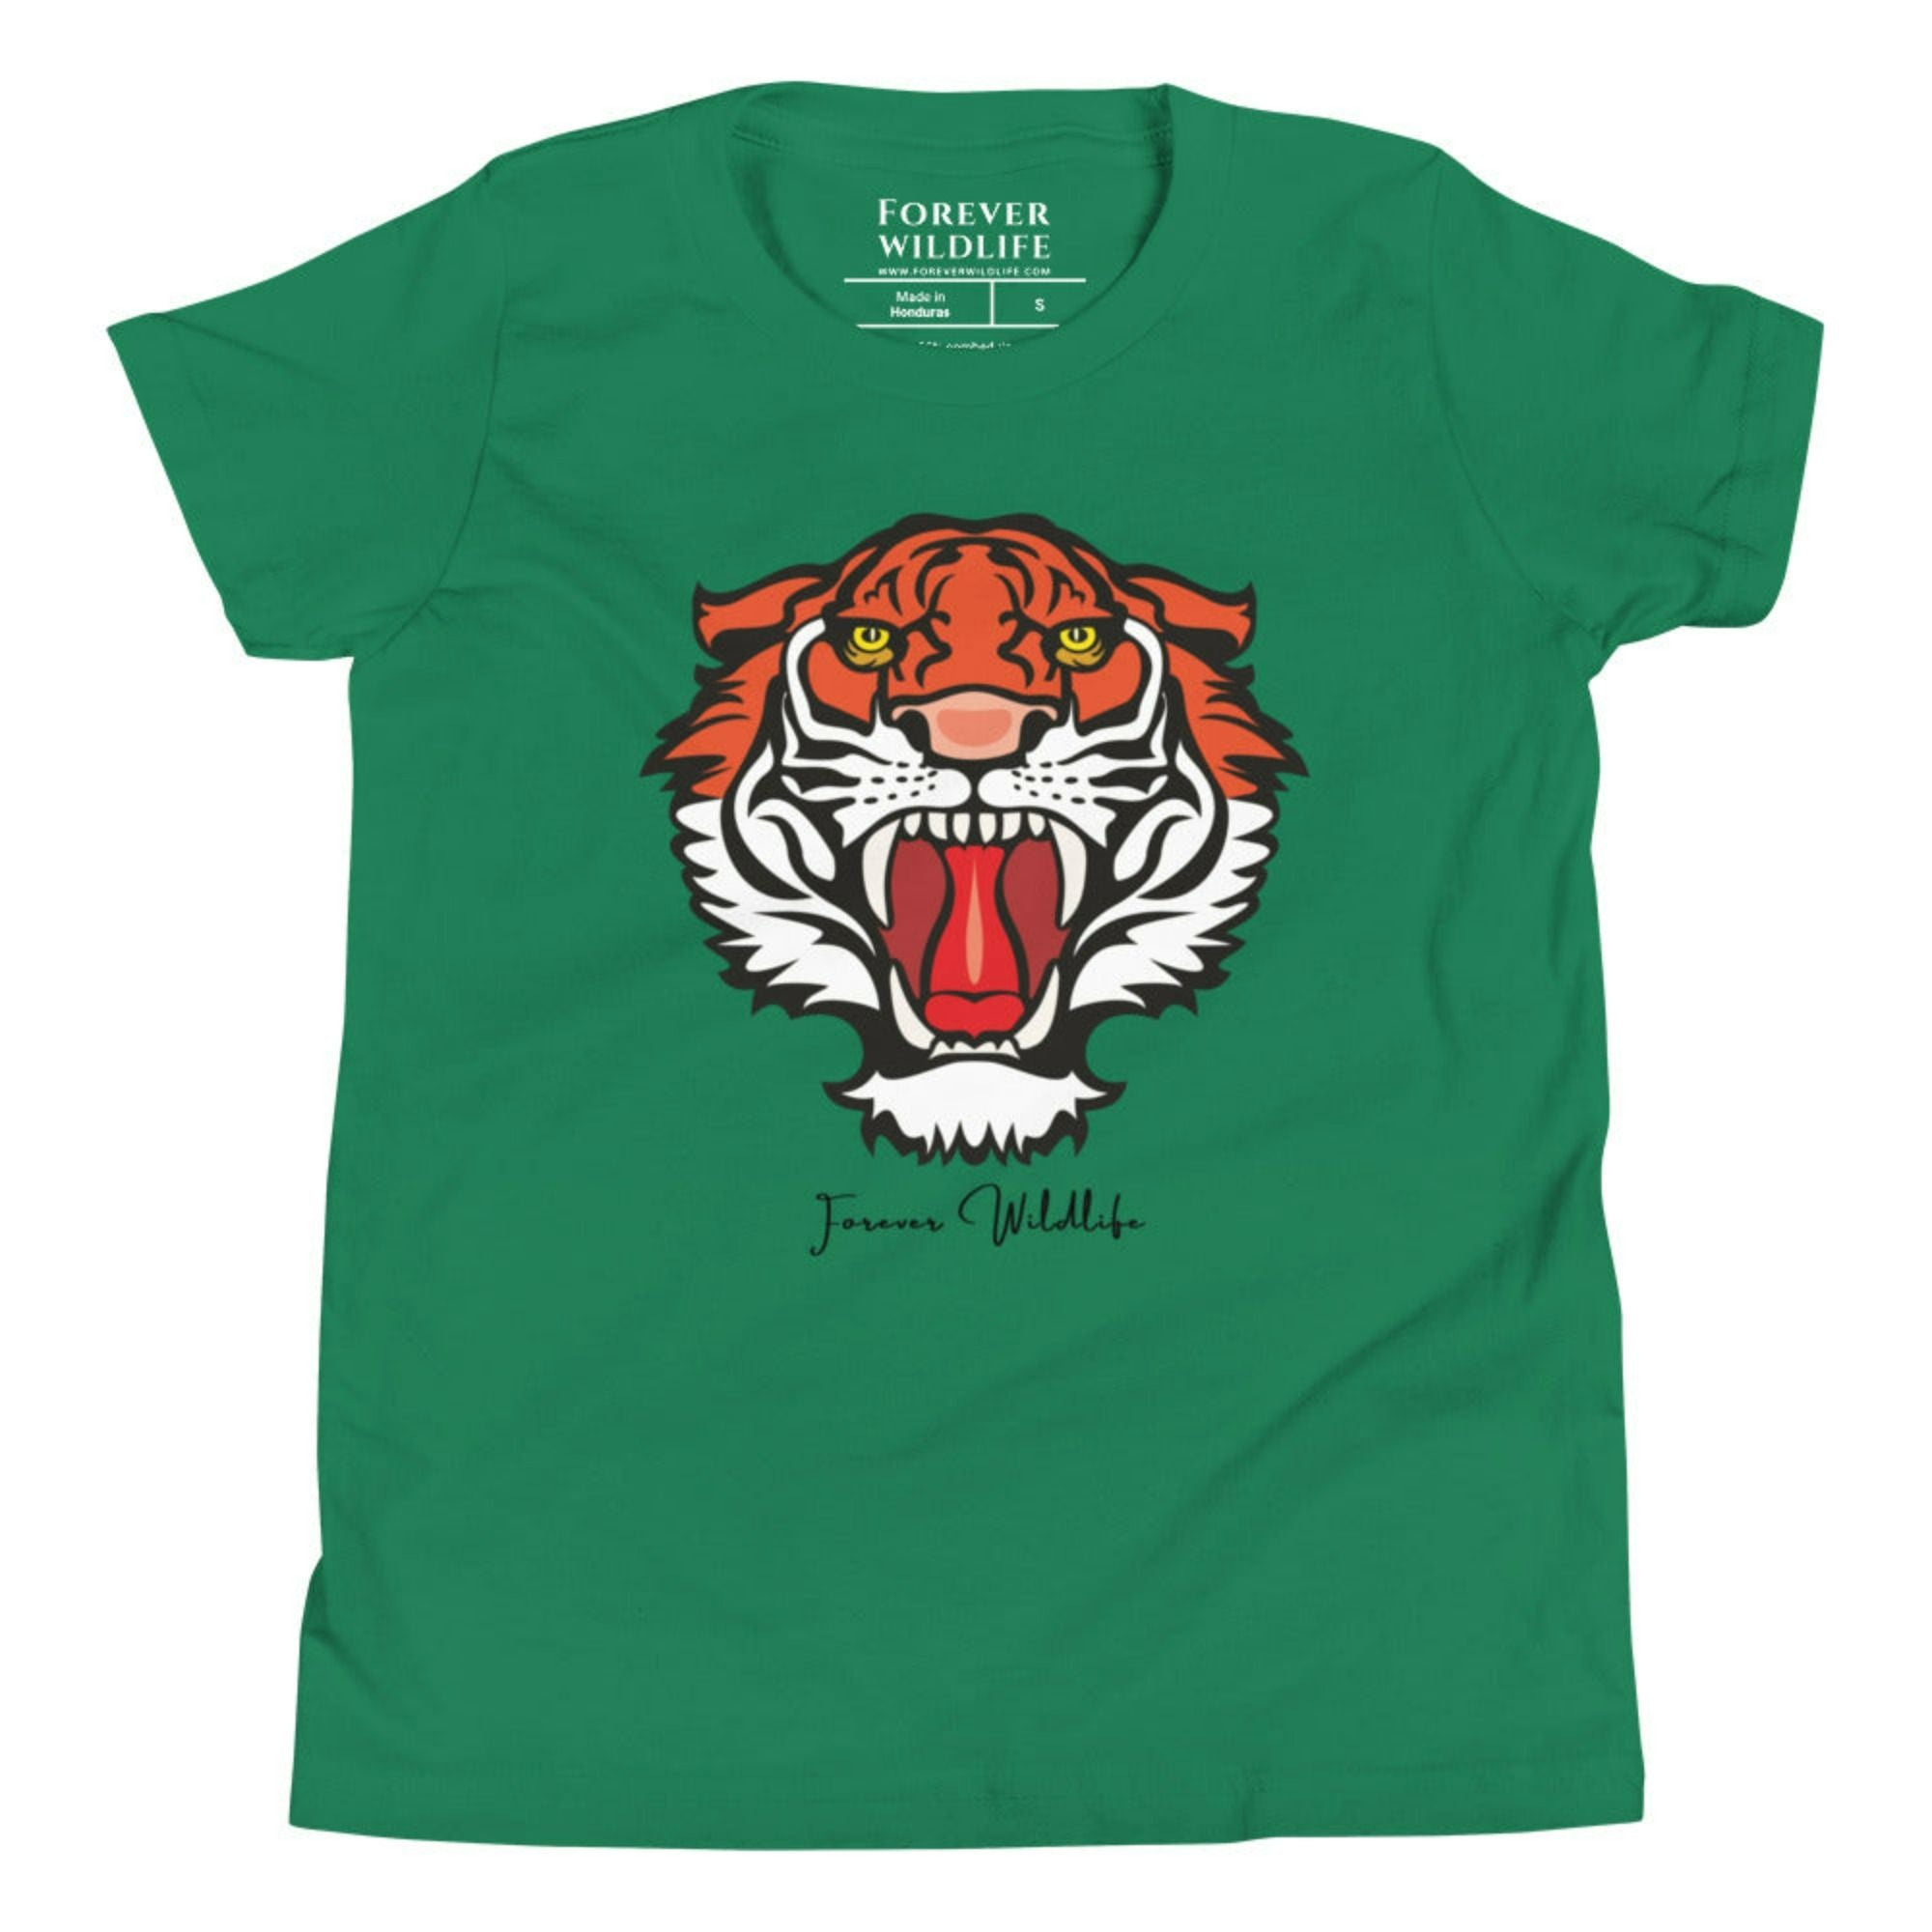 Kelly Green Youth T-Shirt with Tiger graphic as part of Wildlife T Shirts, Wildlife Clothing & Apparel by Forever Wildlife